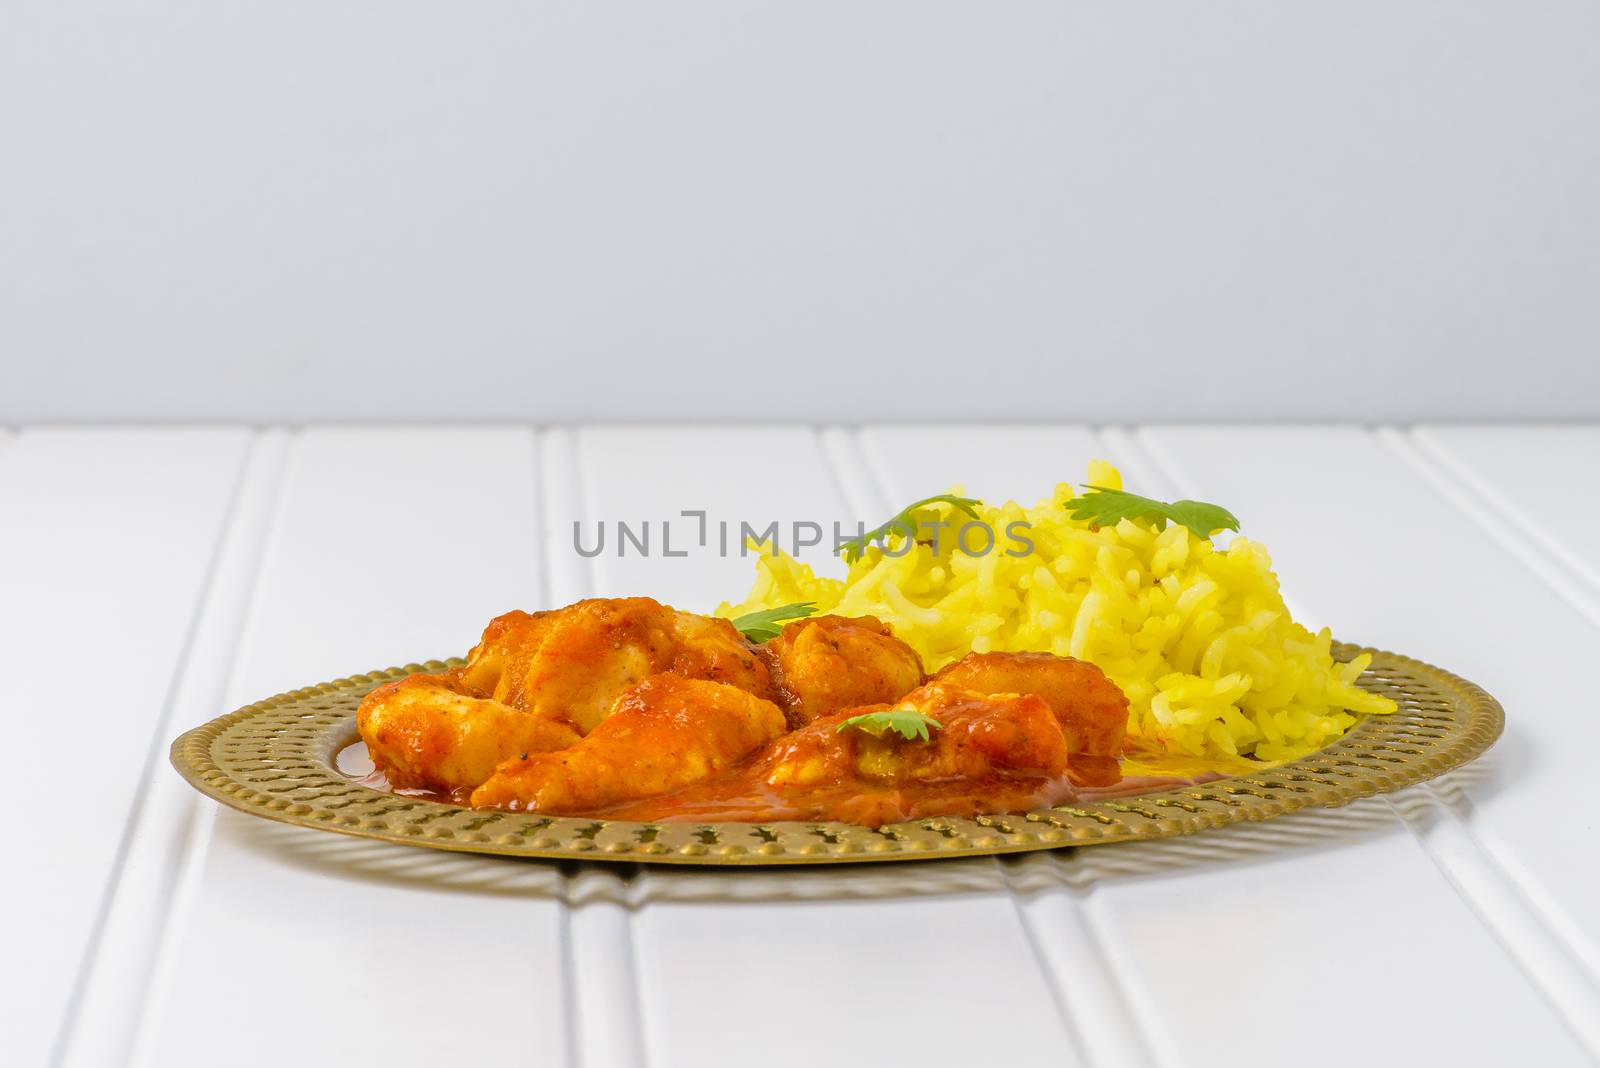 Plate of chicken vindaloo served with basmati rice.